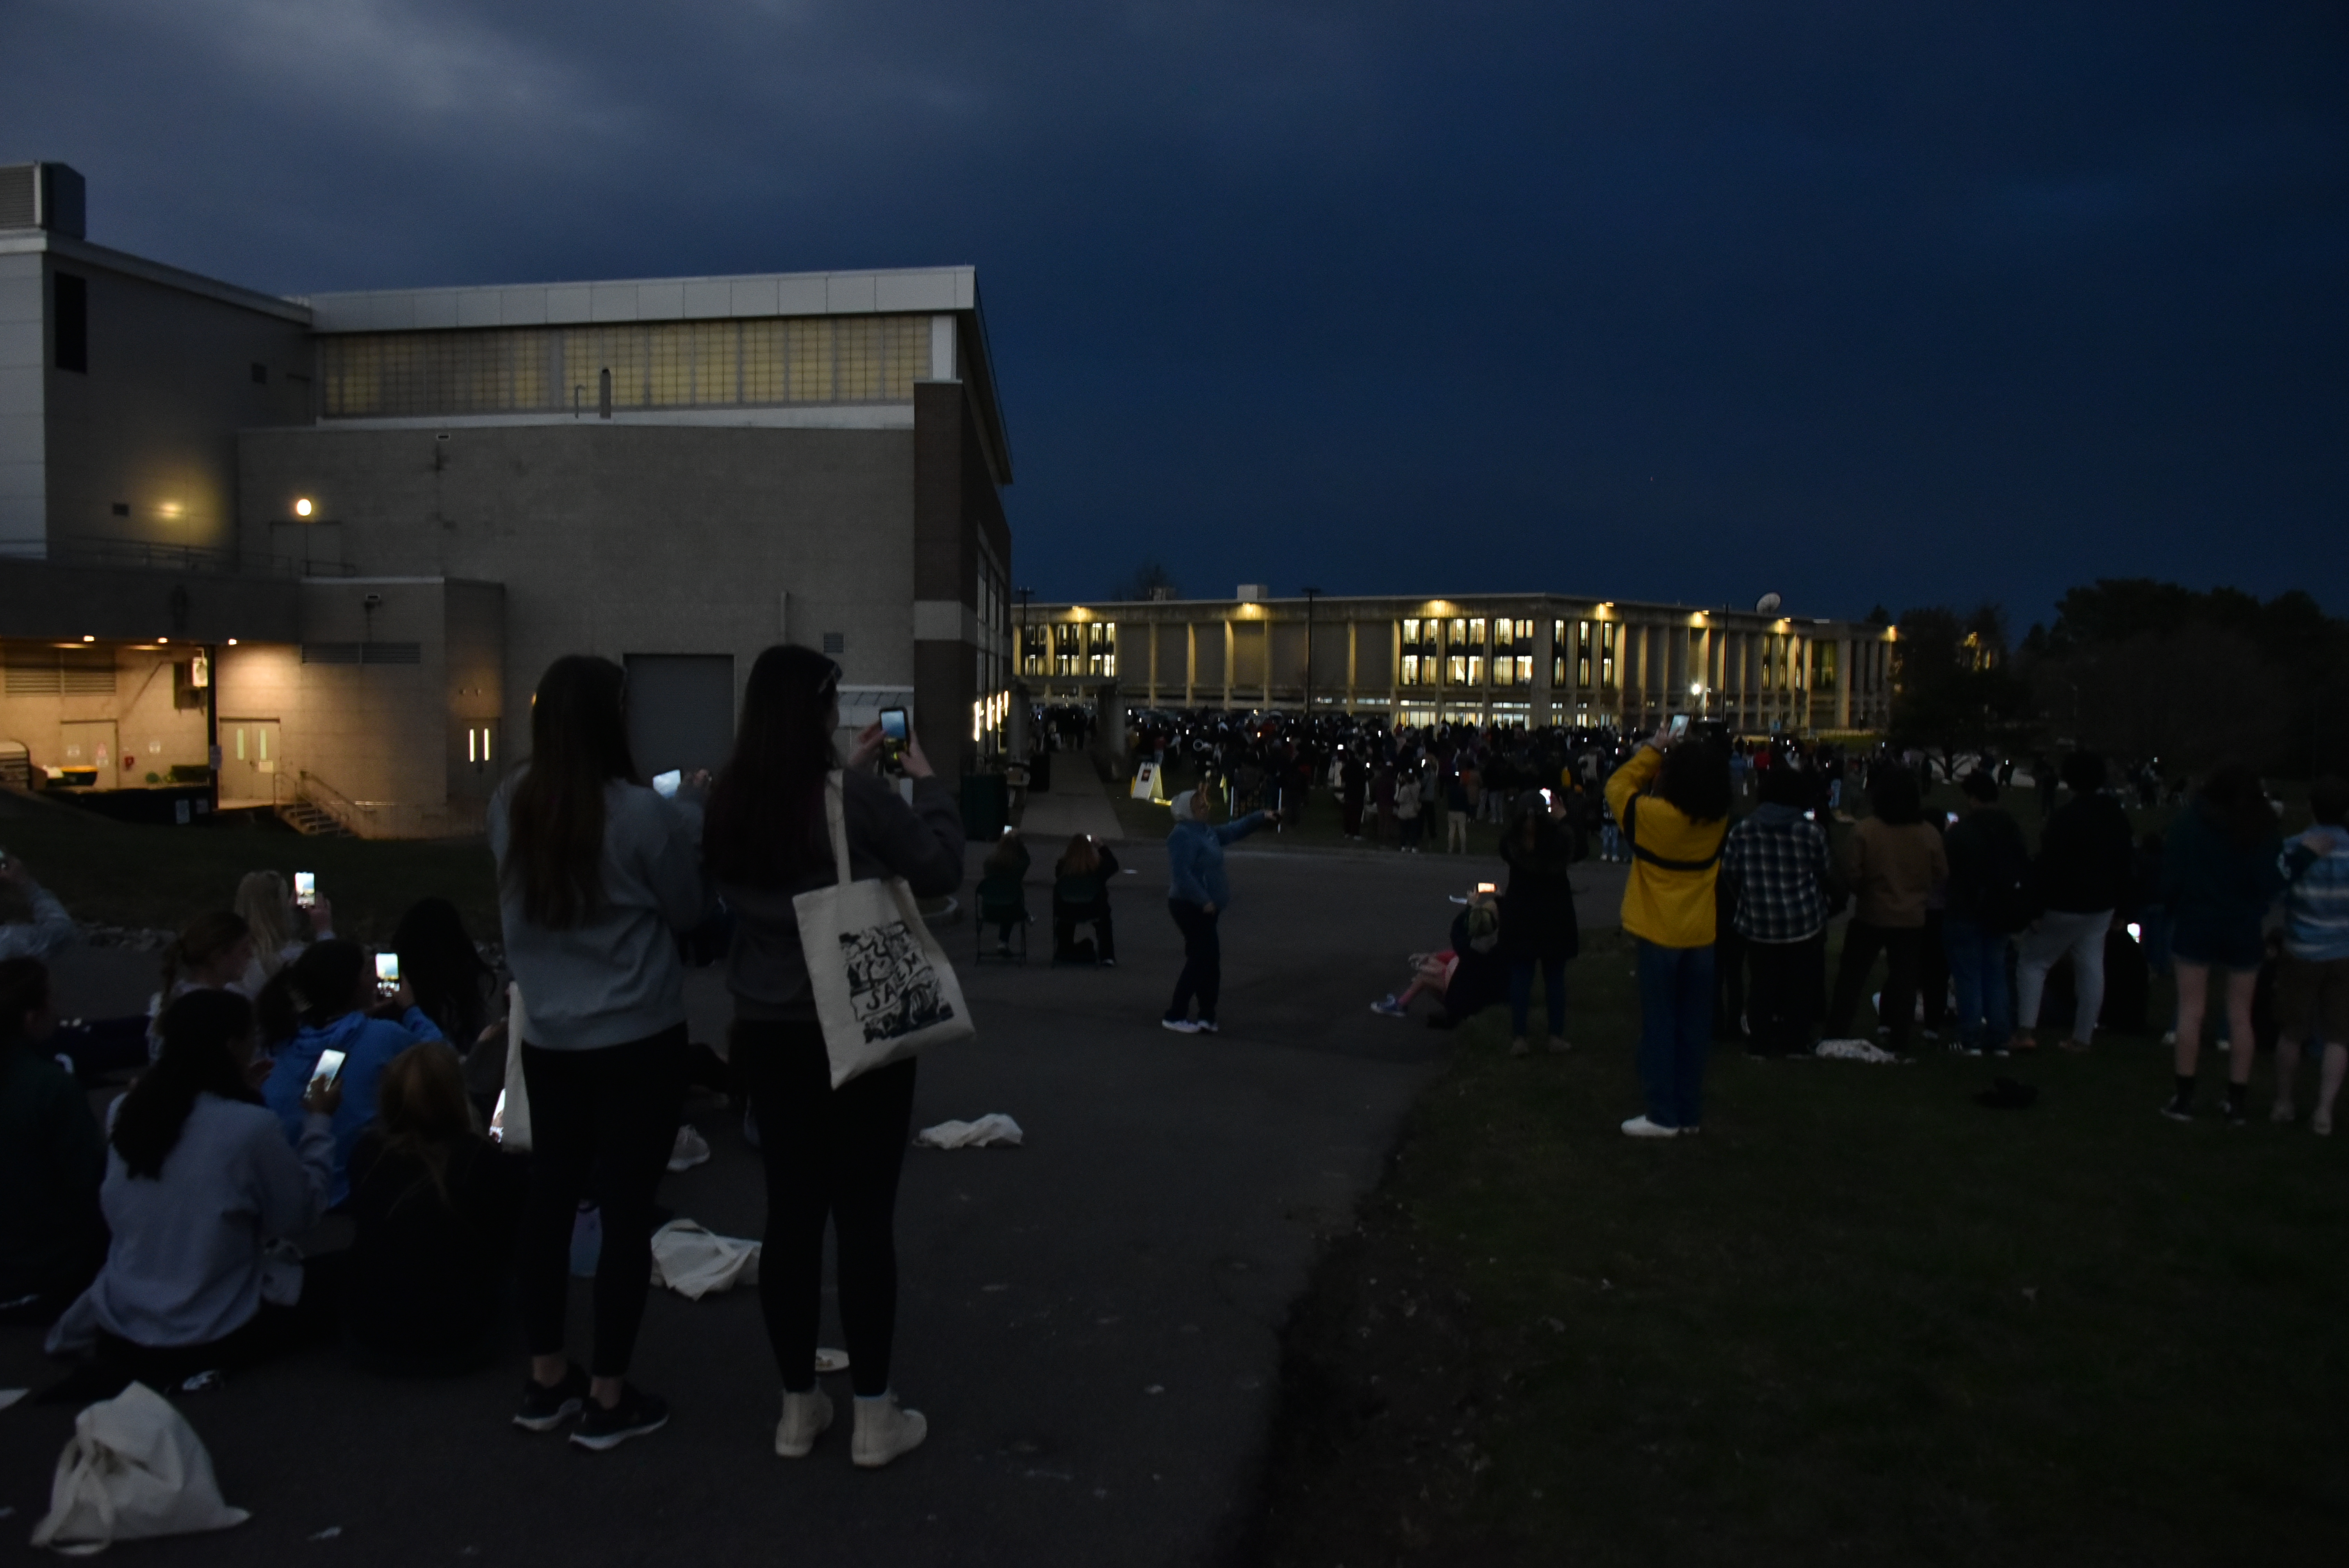 At just before 3:22 p.m. on Monday, April 8, totality occurred over the SUNY Oswego campus as the moon completely blocked the sun for a total solar eclipse, casting the campus into shadow for nearly three and a half minutes. At a watch party behind Swetman Gym, the hundreds gathered cheered every time the sun poked out of the overcast day even briefly to provide a glimpse at the once-in-a-lifetime phenomenon.